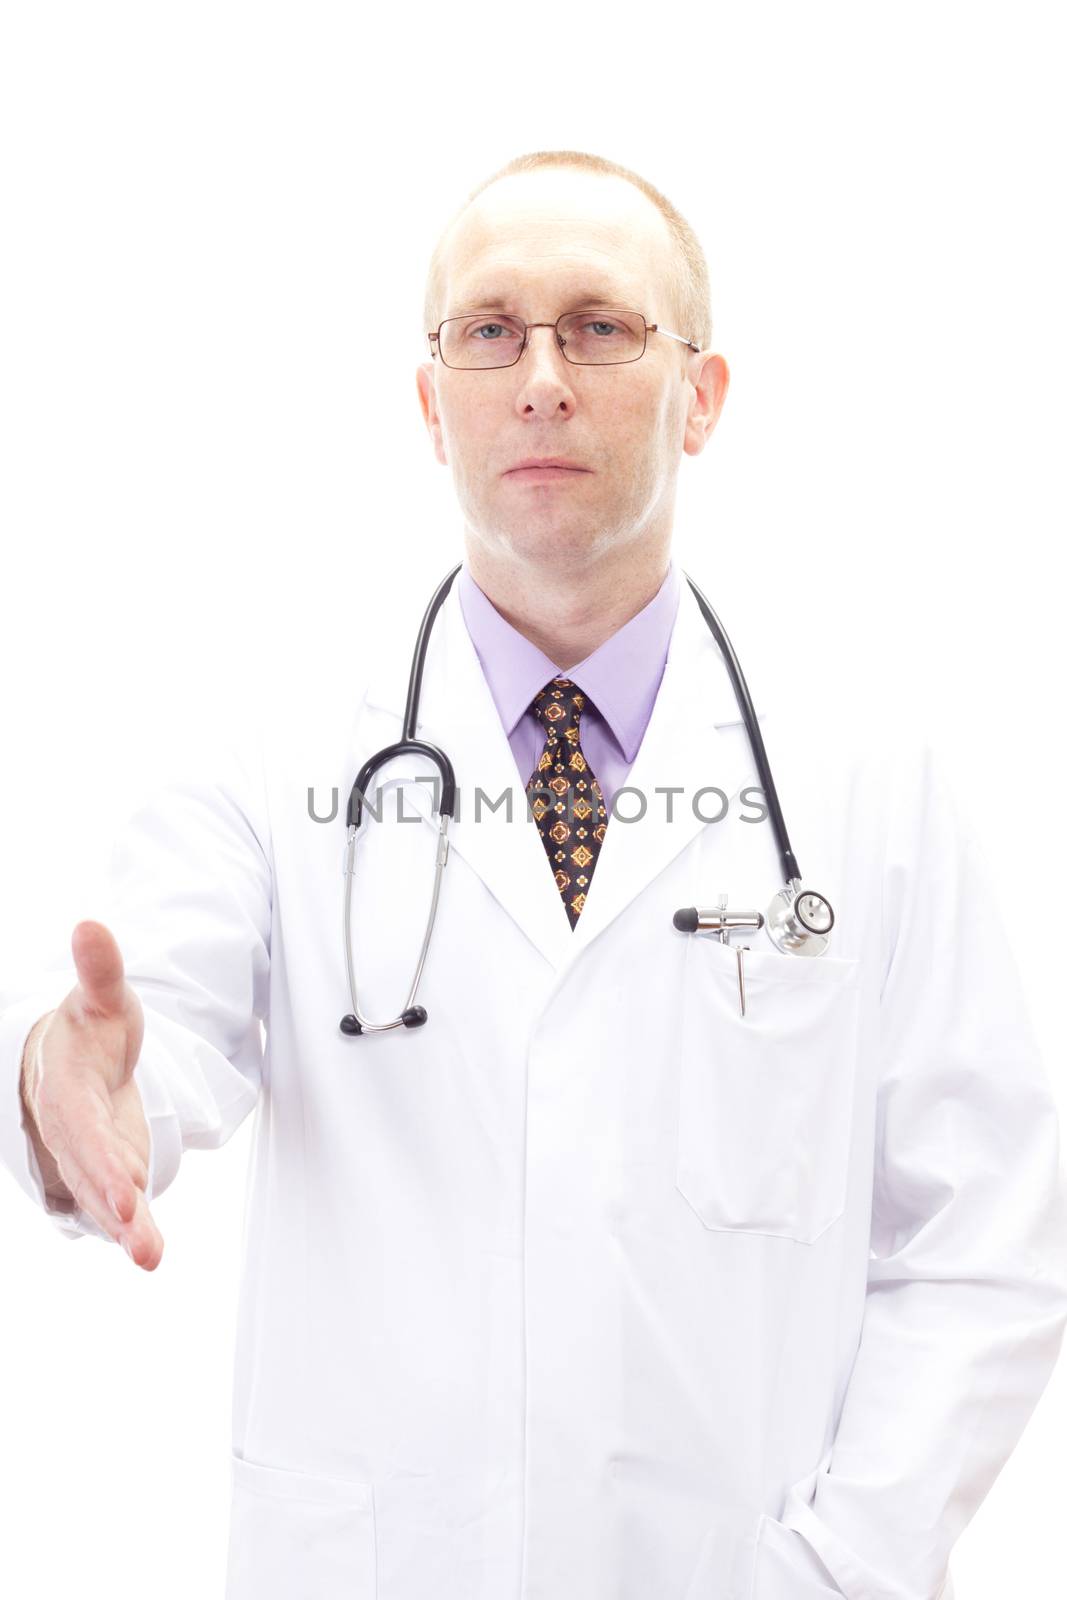 Medical doctor welcomes you by handshake